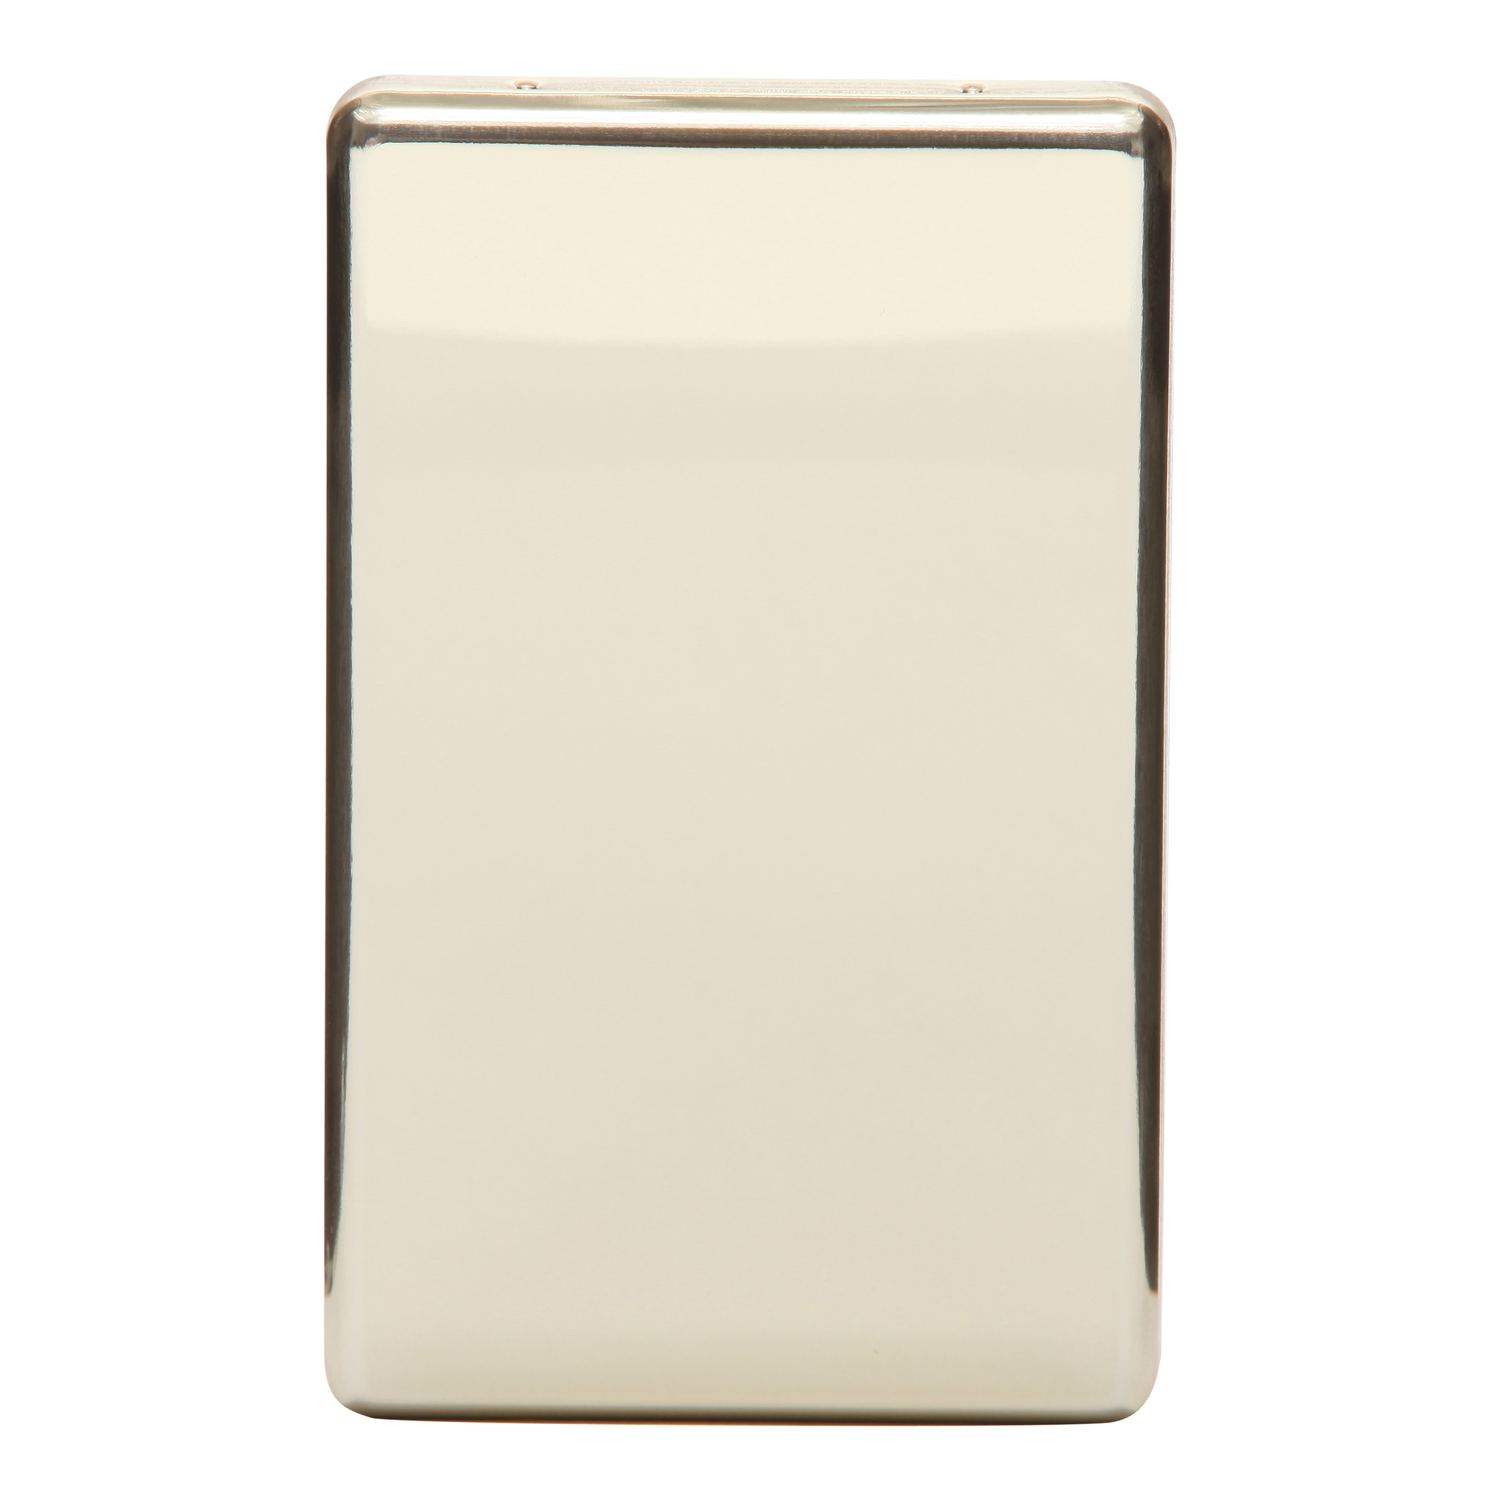 Full-Face Blank Switch Cover Plate; Metal, Polished Brass